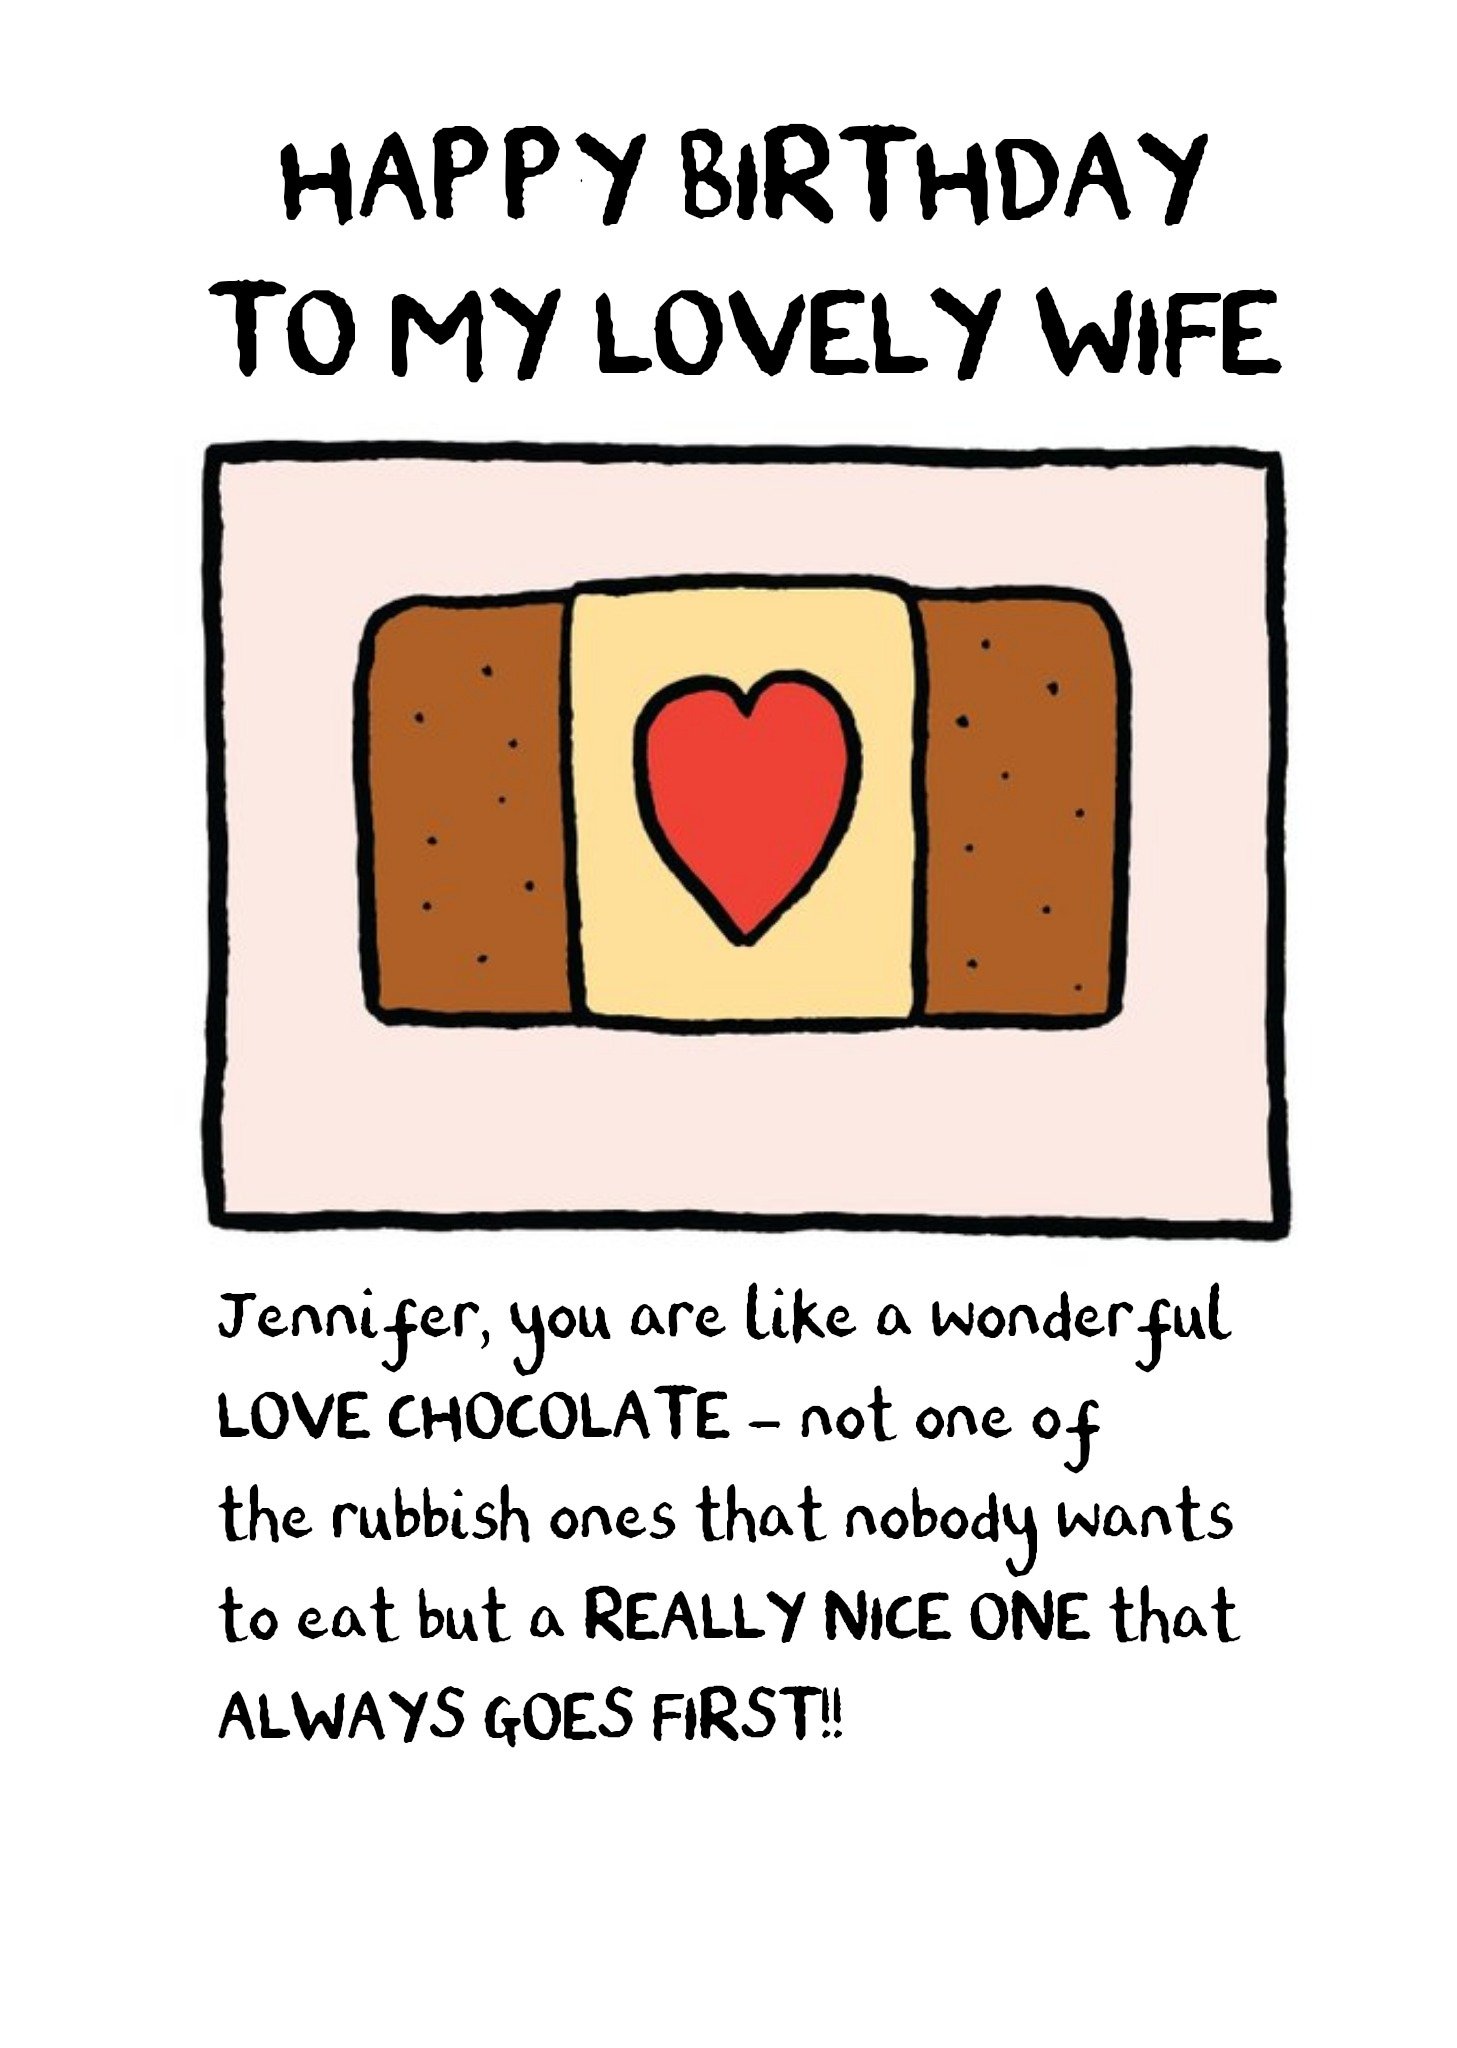 Moonpig Funny Love Chocolate Birthday Card For Wife, Large